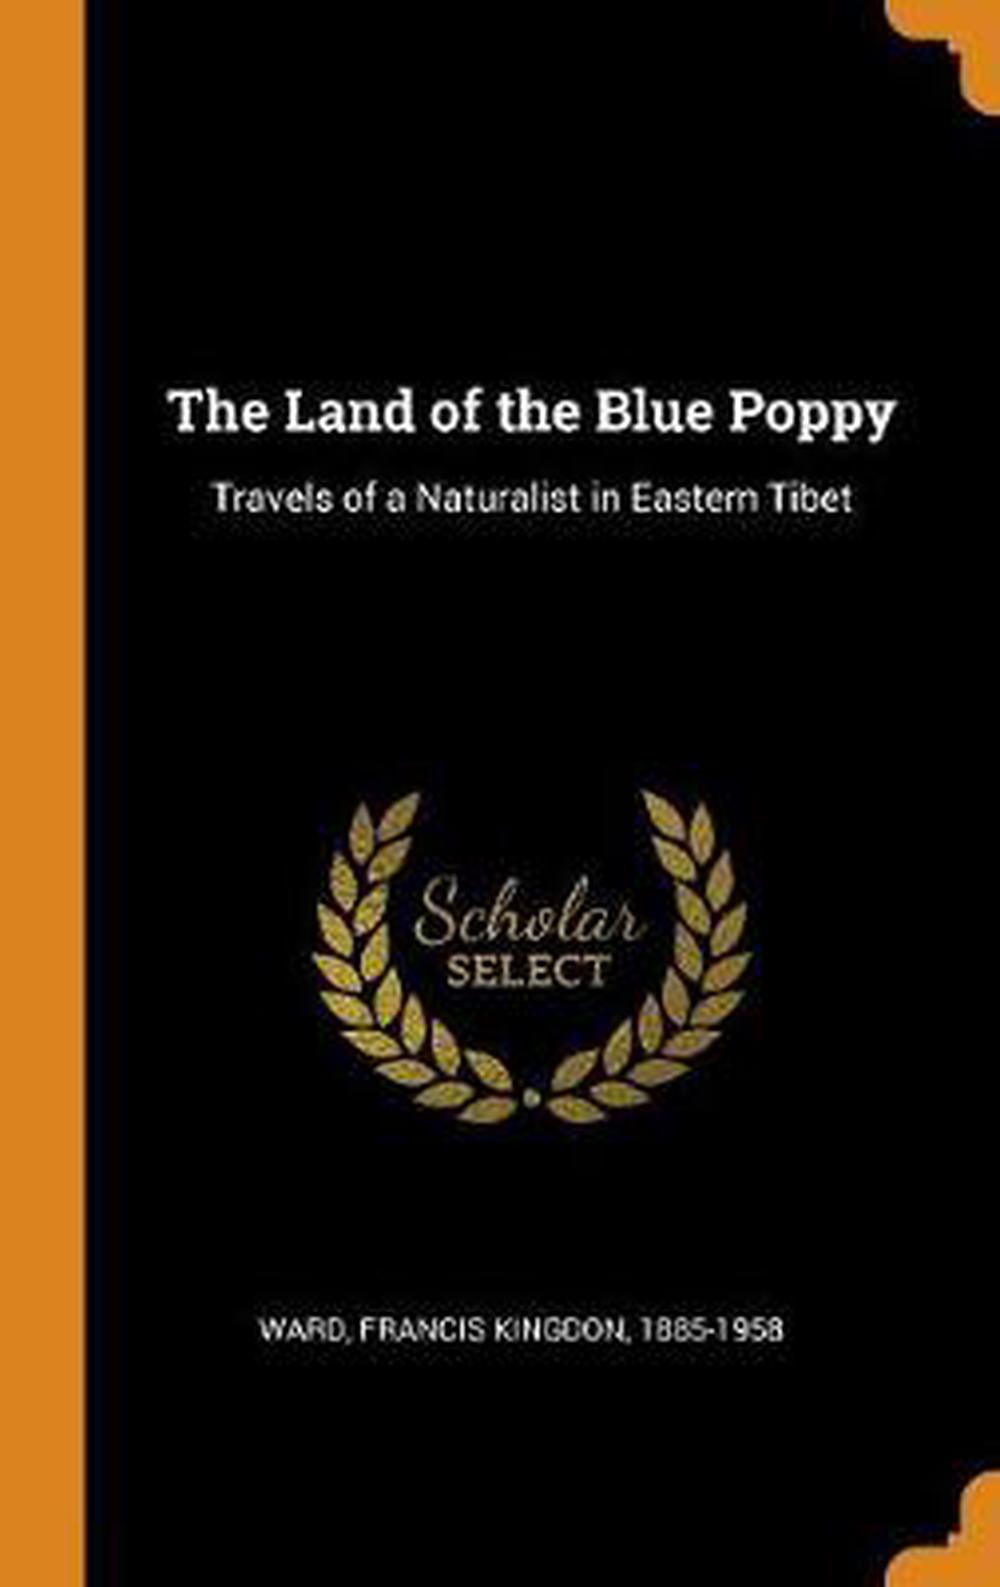 The Land of the Blue Poppy Travels of a Naturalist in Eastern Tibet